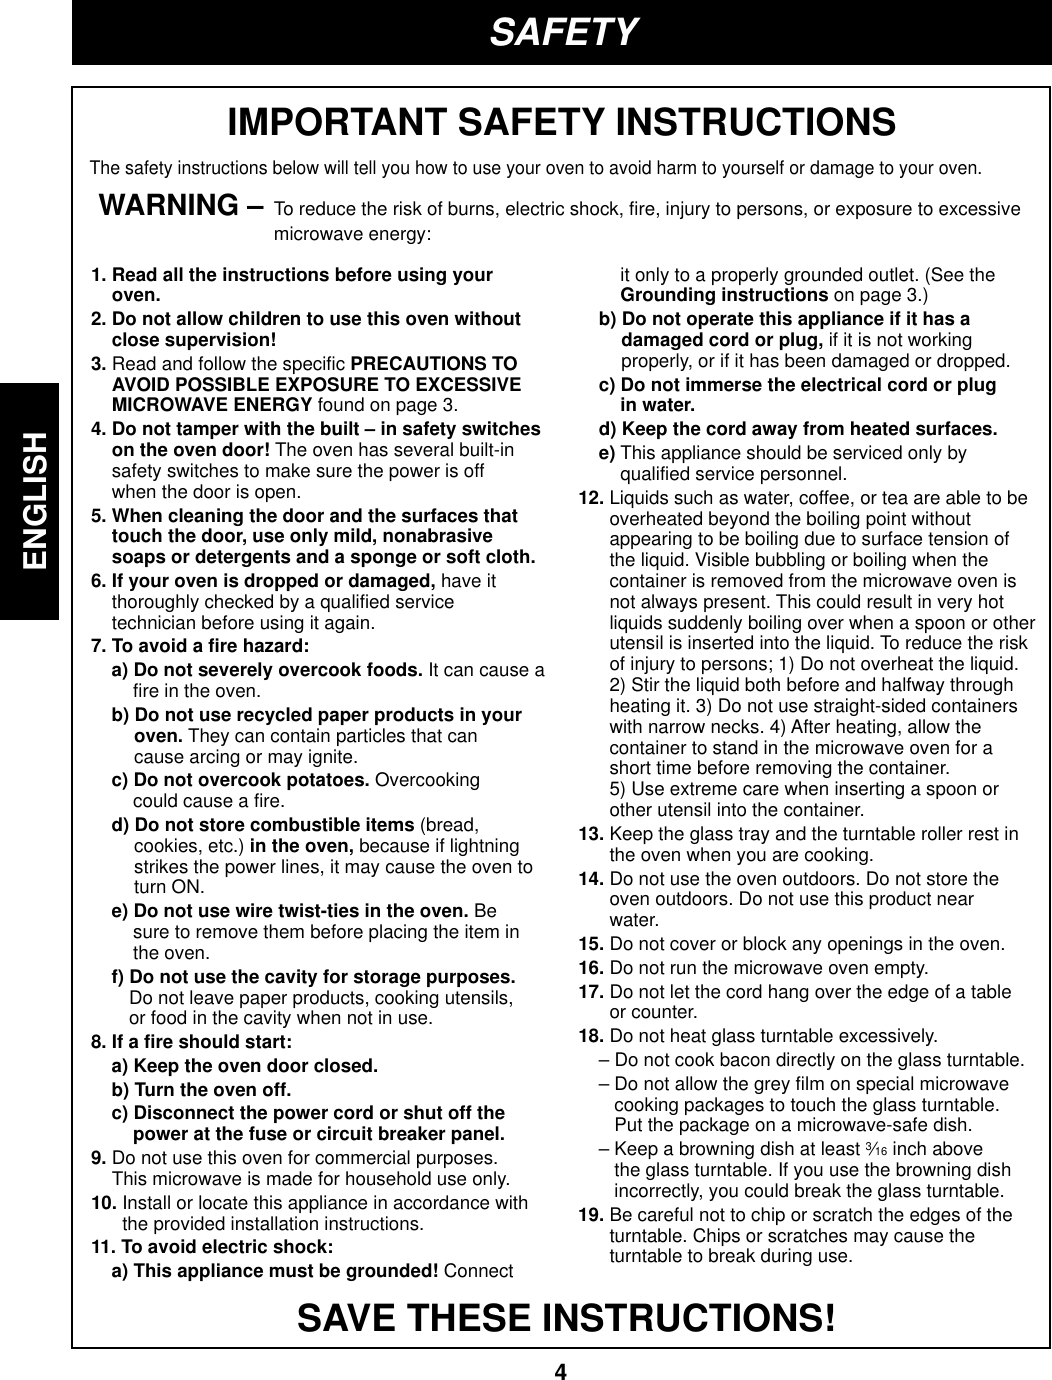 4ENGLISHSAFETYIMPORTANT SAFETY INSTRUCTIONSThe safety instructions below will tell you how to use your oven to avoid harm to yourself or damage to your oven.WARNING – To reduce the risk of burns, electric shock, fire, injury to persons, or exposure to excessivemicrowave energy:SAVE THESE INSTRUCTIONS!1. Read all the instructions before using youroven.2. Do not allow children to use this oven withoutclose supervision!3. Read and follow the specific PRECAUTIONS TOAVOID POSSIBLE EXPOSURE TO EXCESSIVEMICROWAVE ENERGY found on page 3.4. Do not tamper with the built – in safety switcheson the oven door! The oven has several built-insafety switches to make sure the power is offwhen the door is open.5. When cleaning the door and the surfaces thattouch the door, use only mild, nonabrasivesoaps or detergents and a sponge or soft cloth.6. If your oven is dropped or damaged, have itthoroughly checked by a qualified servicetechnician before using it again.7. To avoid a fire hazard:a) Do not severely overcook foods. It can cause afire in the oven.b) Do not use recycled paper products in youroven. They can contain particles that cancause arcing or may ignite.c) Do not overcook potatoes. Overcookingcould cause a fire.d) Do not store combustible items (bread,cookies, etc.) in the oven, because if lightningstrikes the power lines, it may cause the oven toturn ON.e) Do not use wire twist-ties in the oven. Besure to remove them before placing the item inthe oven.f) Do not use the cavity for storage purposes.Do not leave paper products, cooking utensils,or food in the cavity when not in use.8. If a fire should start:a) Keep the oven door closed.b) Turn the oven off.c) Disconnect the power cord or shut off thepower at the fuse or circuit breaker panel.9. Do not use this oven for commercial purposes.This microwave is made for household use only.10. Install or locate this appliance in accordance withthe provided installation instructions.11. To avoid electric shock:a) This appliance must be grounded! Connectit only to a properly grounded outlet. (See theGrounding instructions on page 3.)b) Do not operate this appliance if it has adamaged cord or plug, if it is not workingproperly, or if it has been damaged or dropped.c) Do not immerse the electrical cord or plugin water.d) Keep the cord away from heated surfaces.e) This appliance should be serviced only byqualified service personnel.12. Liquids such as water, coffee, or tea are able to beoverheated beyond the boiling point withoutappearing to be boiling due to surface tension ofthe liquid. Visible bubbling or boiling when thecontainer is removed from the microwave oven isnot always present. This could result in very hotliquids suddenly boiling over when a spoon or otherutensil is inserted into the liquid. To reduce the riskof injury to persons; 1) Do not overheat the liquid.2) Stir the liquid both before and halfway throughheating it. 3) Do not use straight-sided containerswith narrow necks. 4) After heating, allow thecontainer to stand in the microwave oven for ashort time before removing the container.  5) Use extreme care when inserting a spoon orother utensil into the container.13. Keep the glass tray and the turntable roller rest inthe oven when you are cooking.14. Do not use the oven outdoors. Do not store theoven outdoors. Do not use this product nearwater.15. Do not cover or block any openings in the oven.16. Do not run the microwave oven empty.17. Do not let the cord hang over the edge of a tableor counter.18. Do not heat glass turntable excessively.– Do not cook bacon directly on the glass turntable.– Do not allow the grey film on special microwavecooking packages to touch the glass turntable.Put the package on a microwave-safe dish.– Keep a browning dish at least 3⁄16 inch abovethe glass turntable. If you use the browning dishincorrectly, you could break the glass turntable.19. Be careful not to chip or scratch the edges of theturntable. Chips or scratches may cause theturntable to break during use.